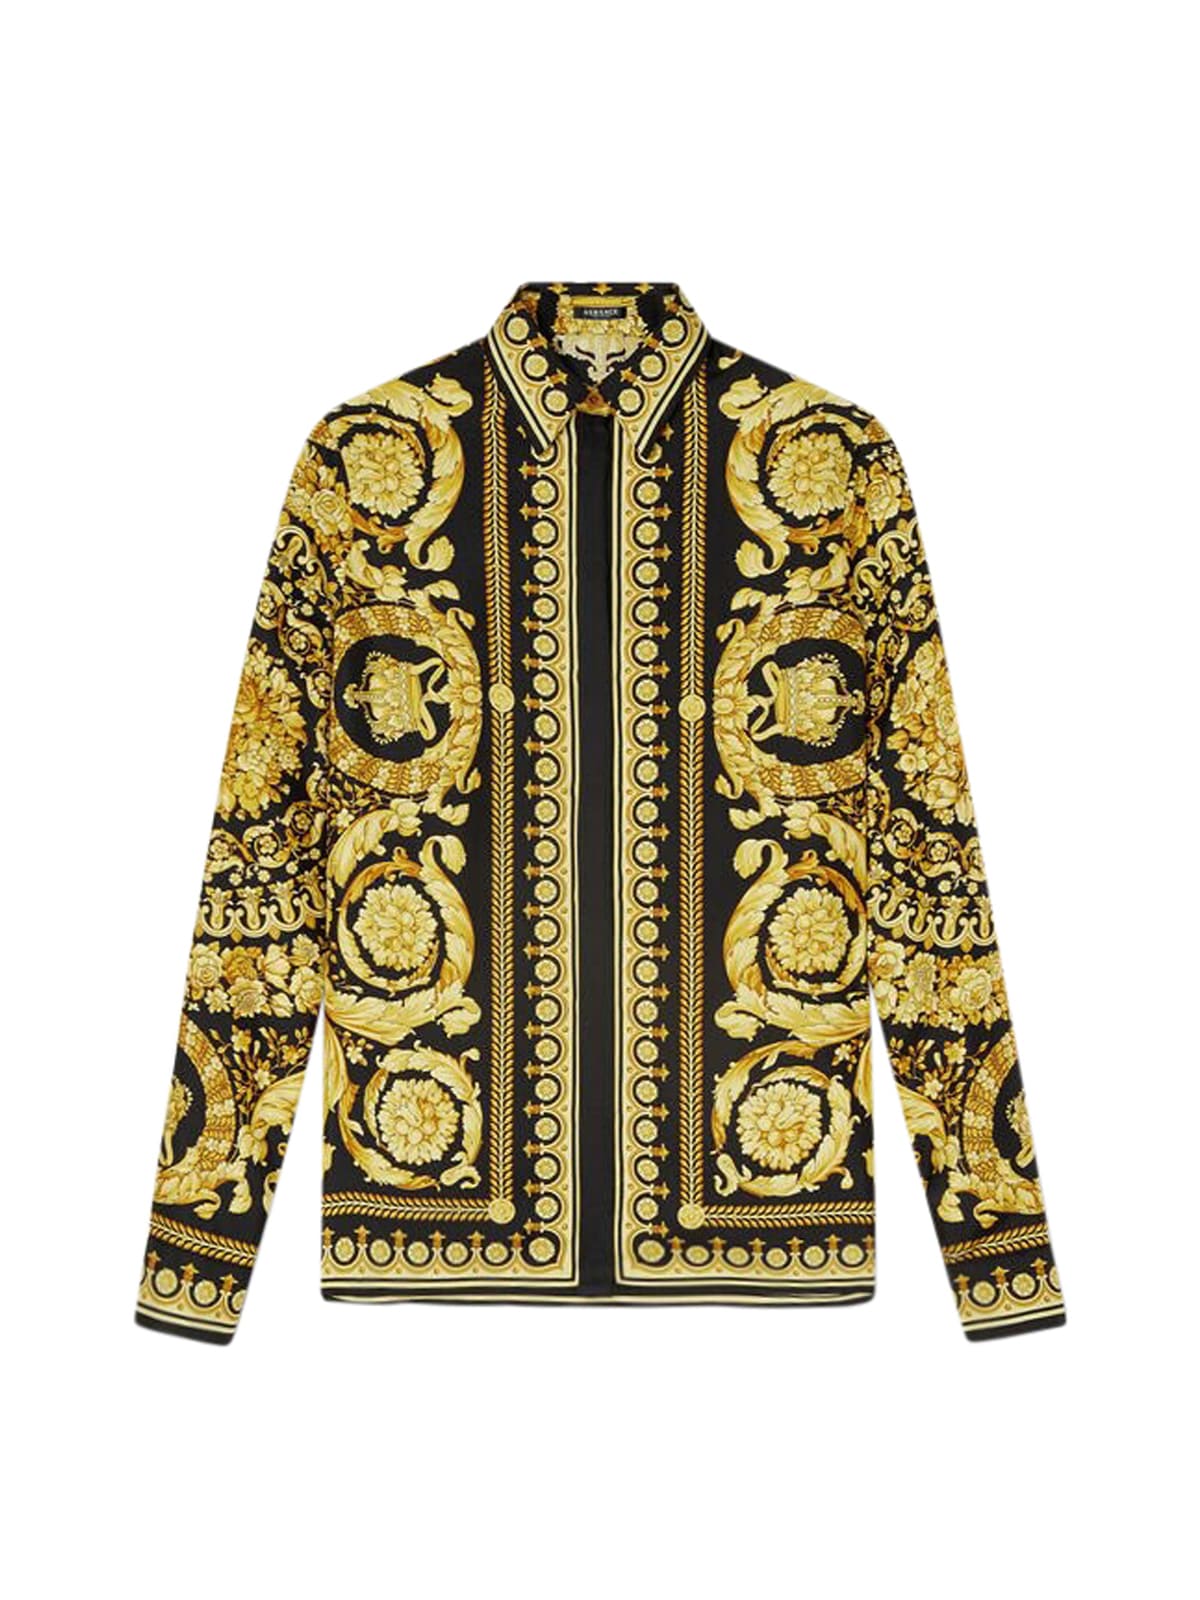 Versace Formal Shirt Twill Silk Fabric With Baroque Heritage Print In Black Gold